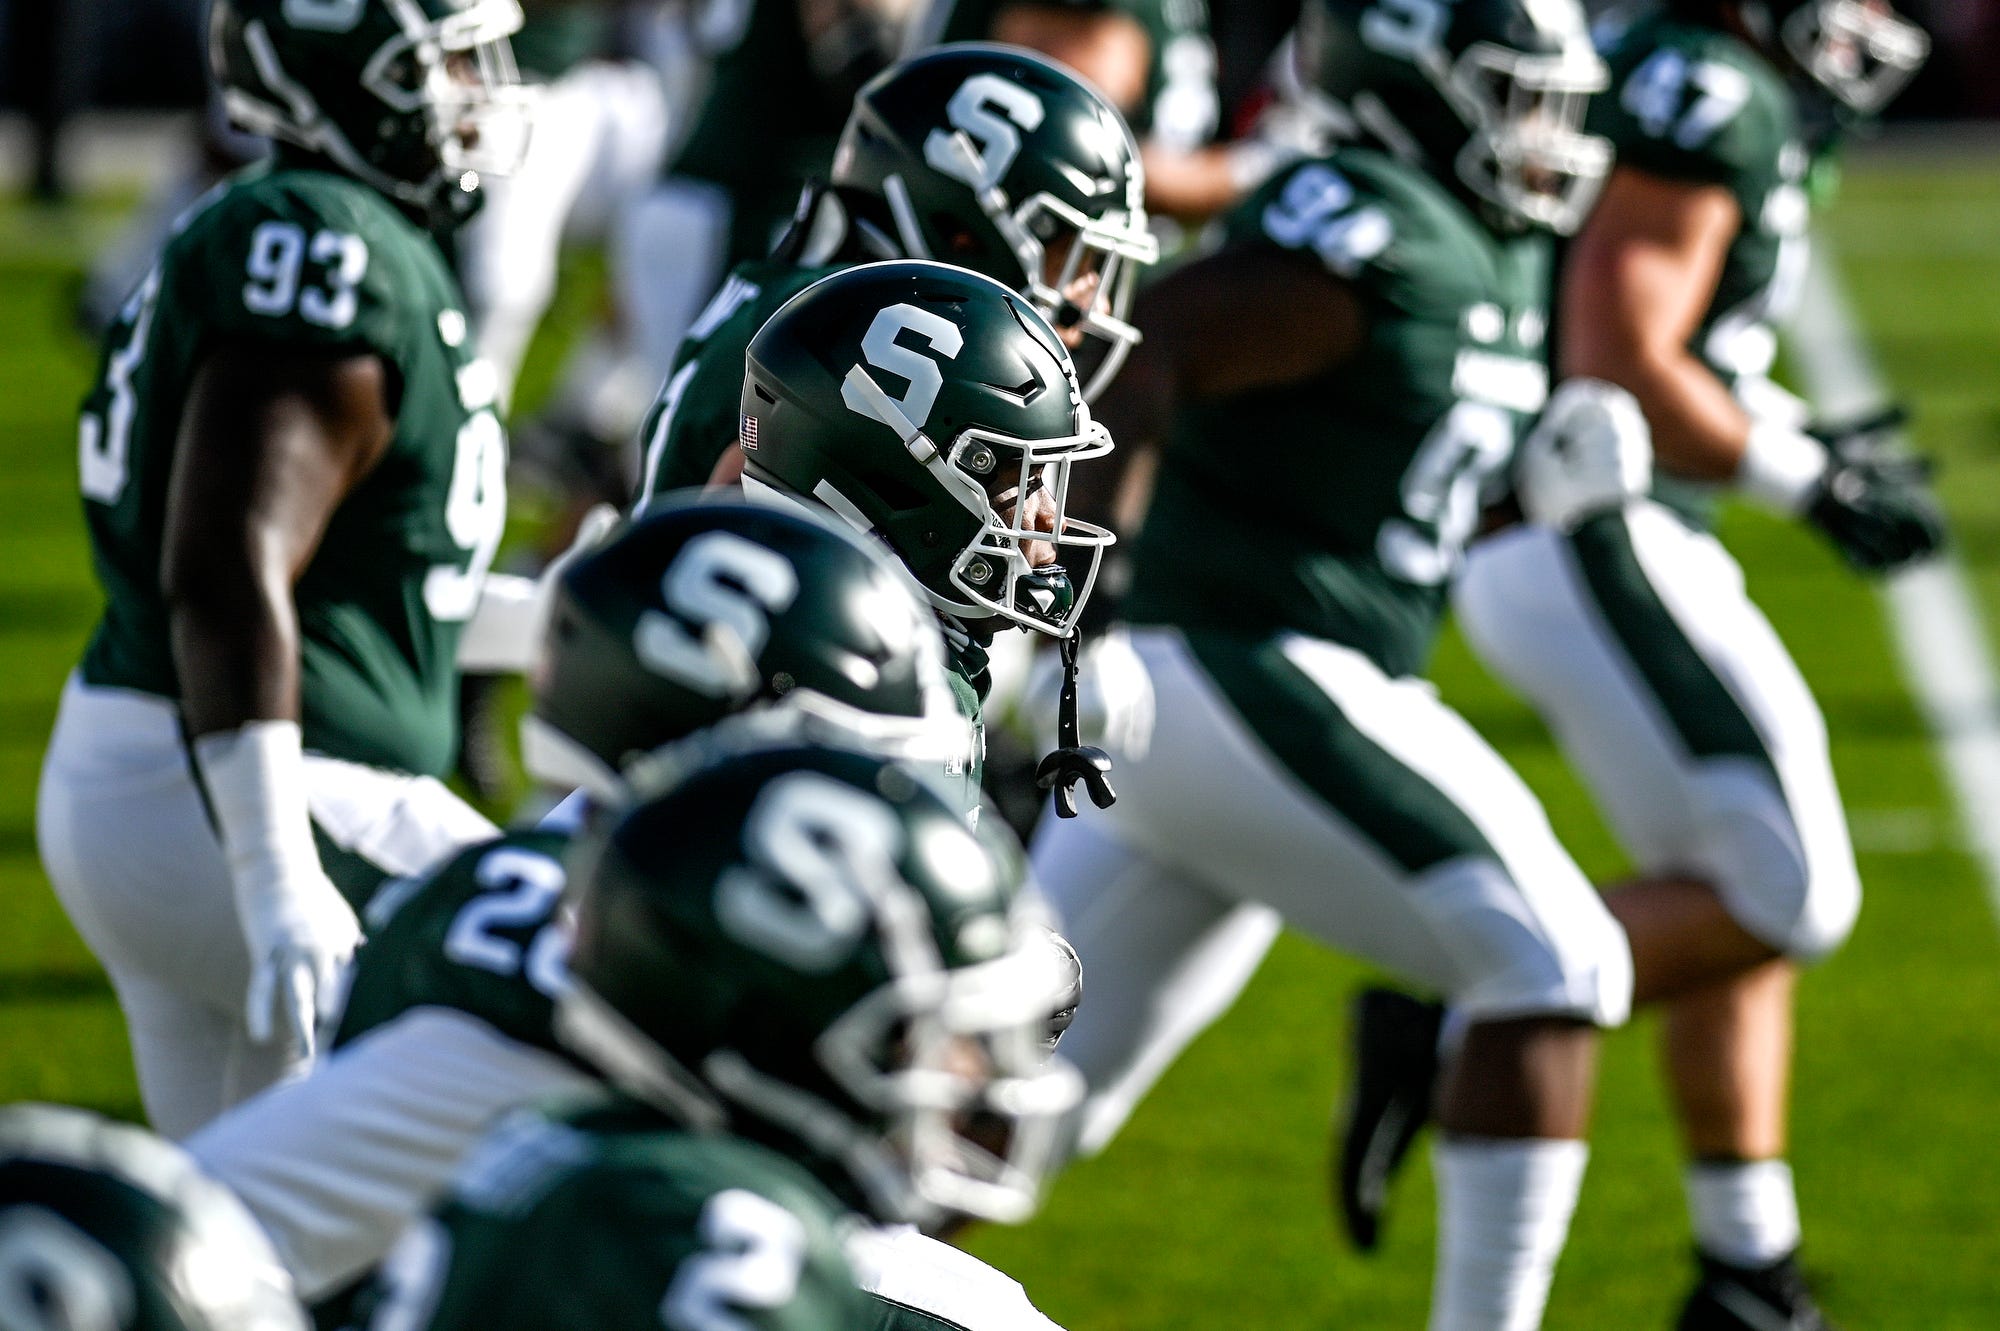 Michigan State Football's 2016 Recruiting Class Is Ranked Higher